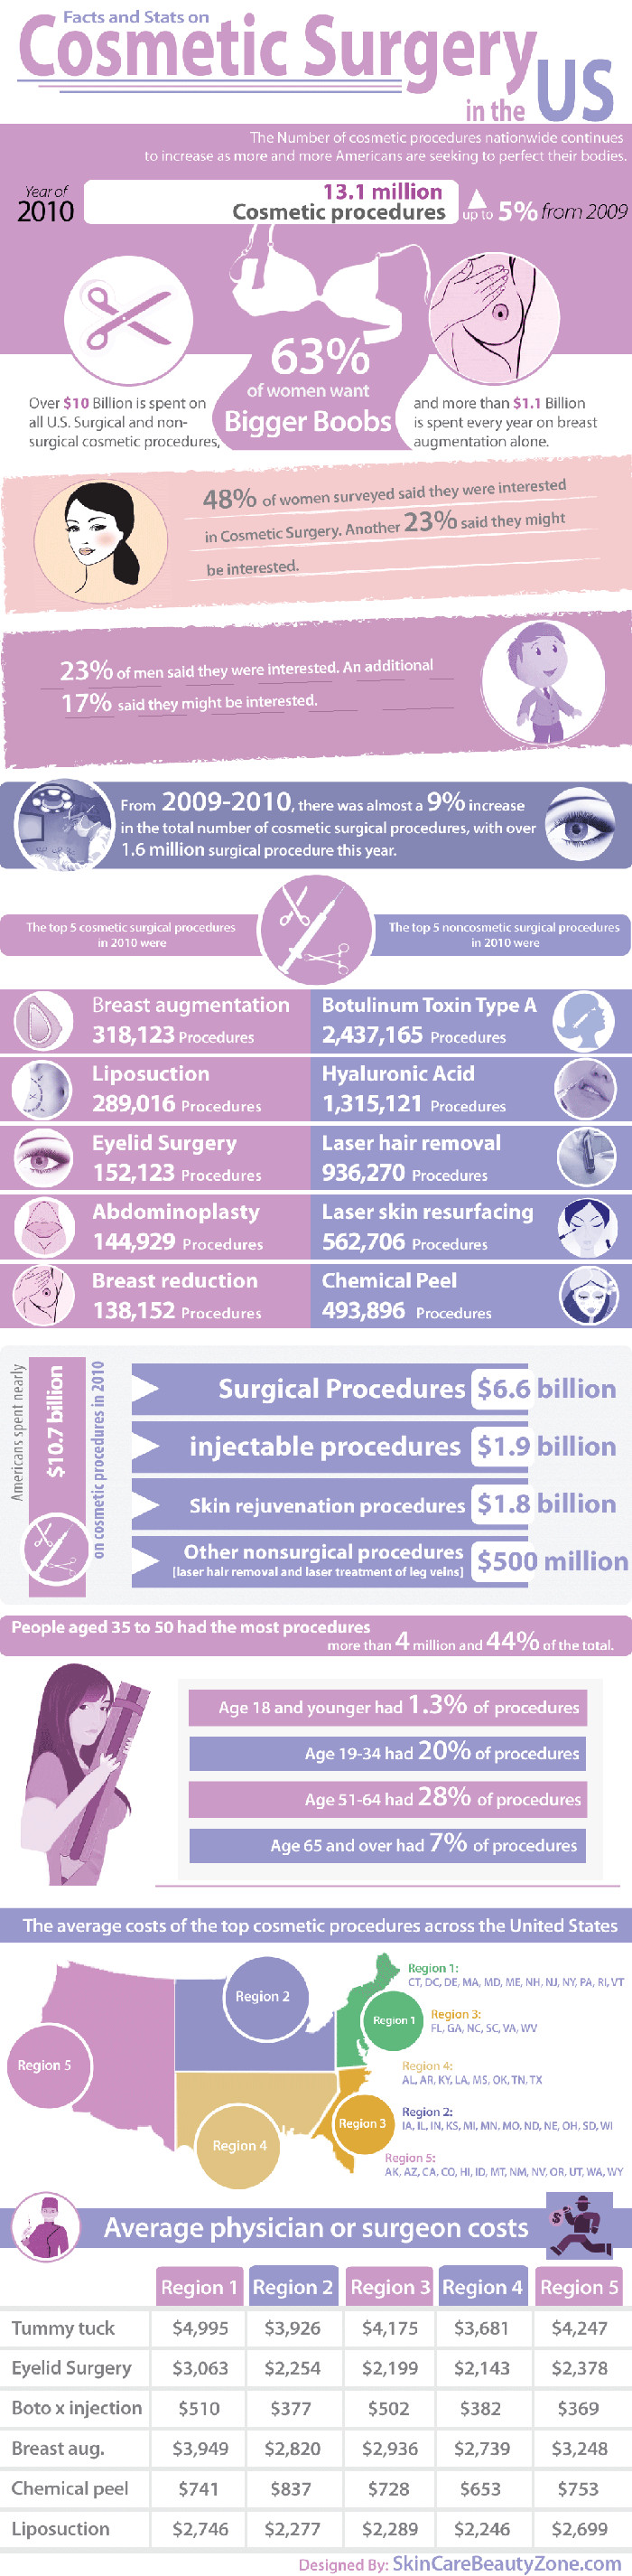 Cosmetic Surgery in The US